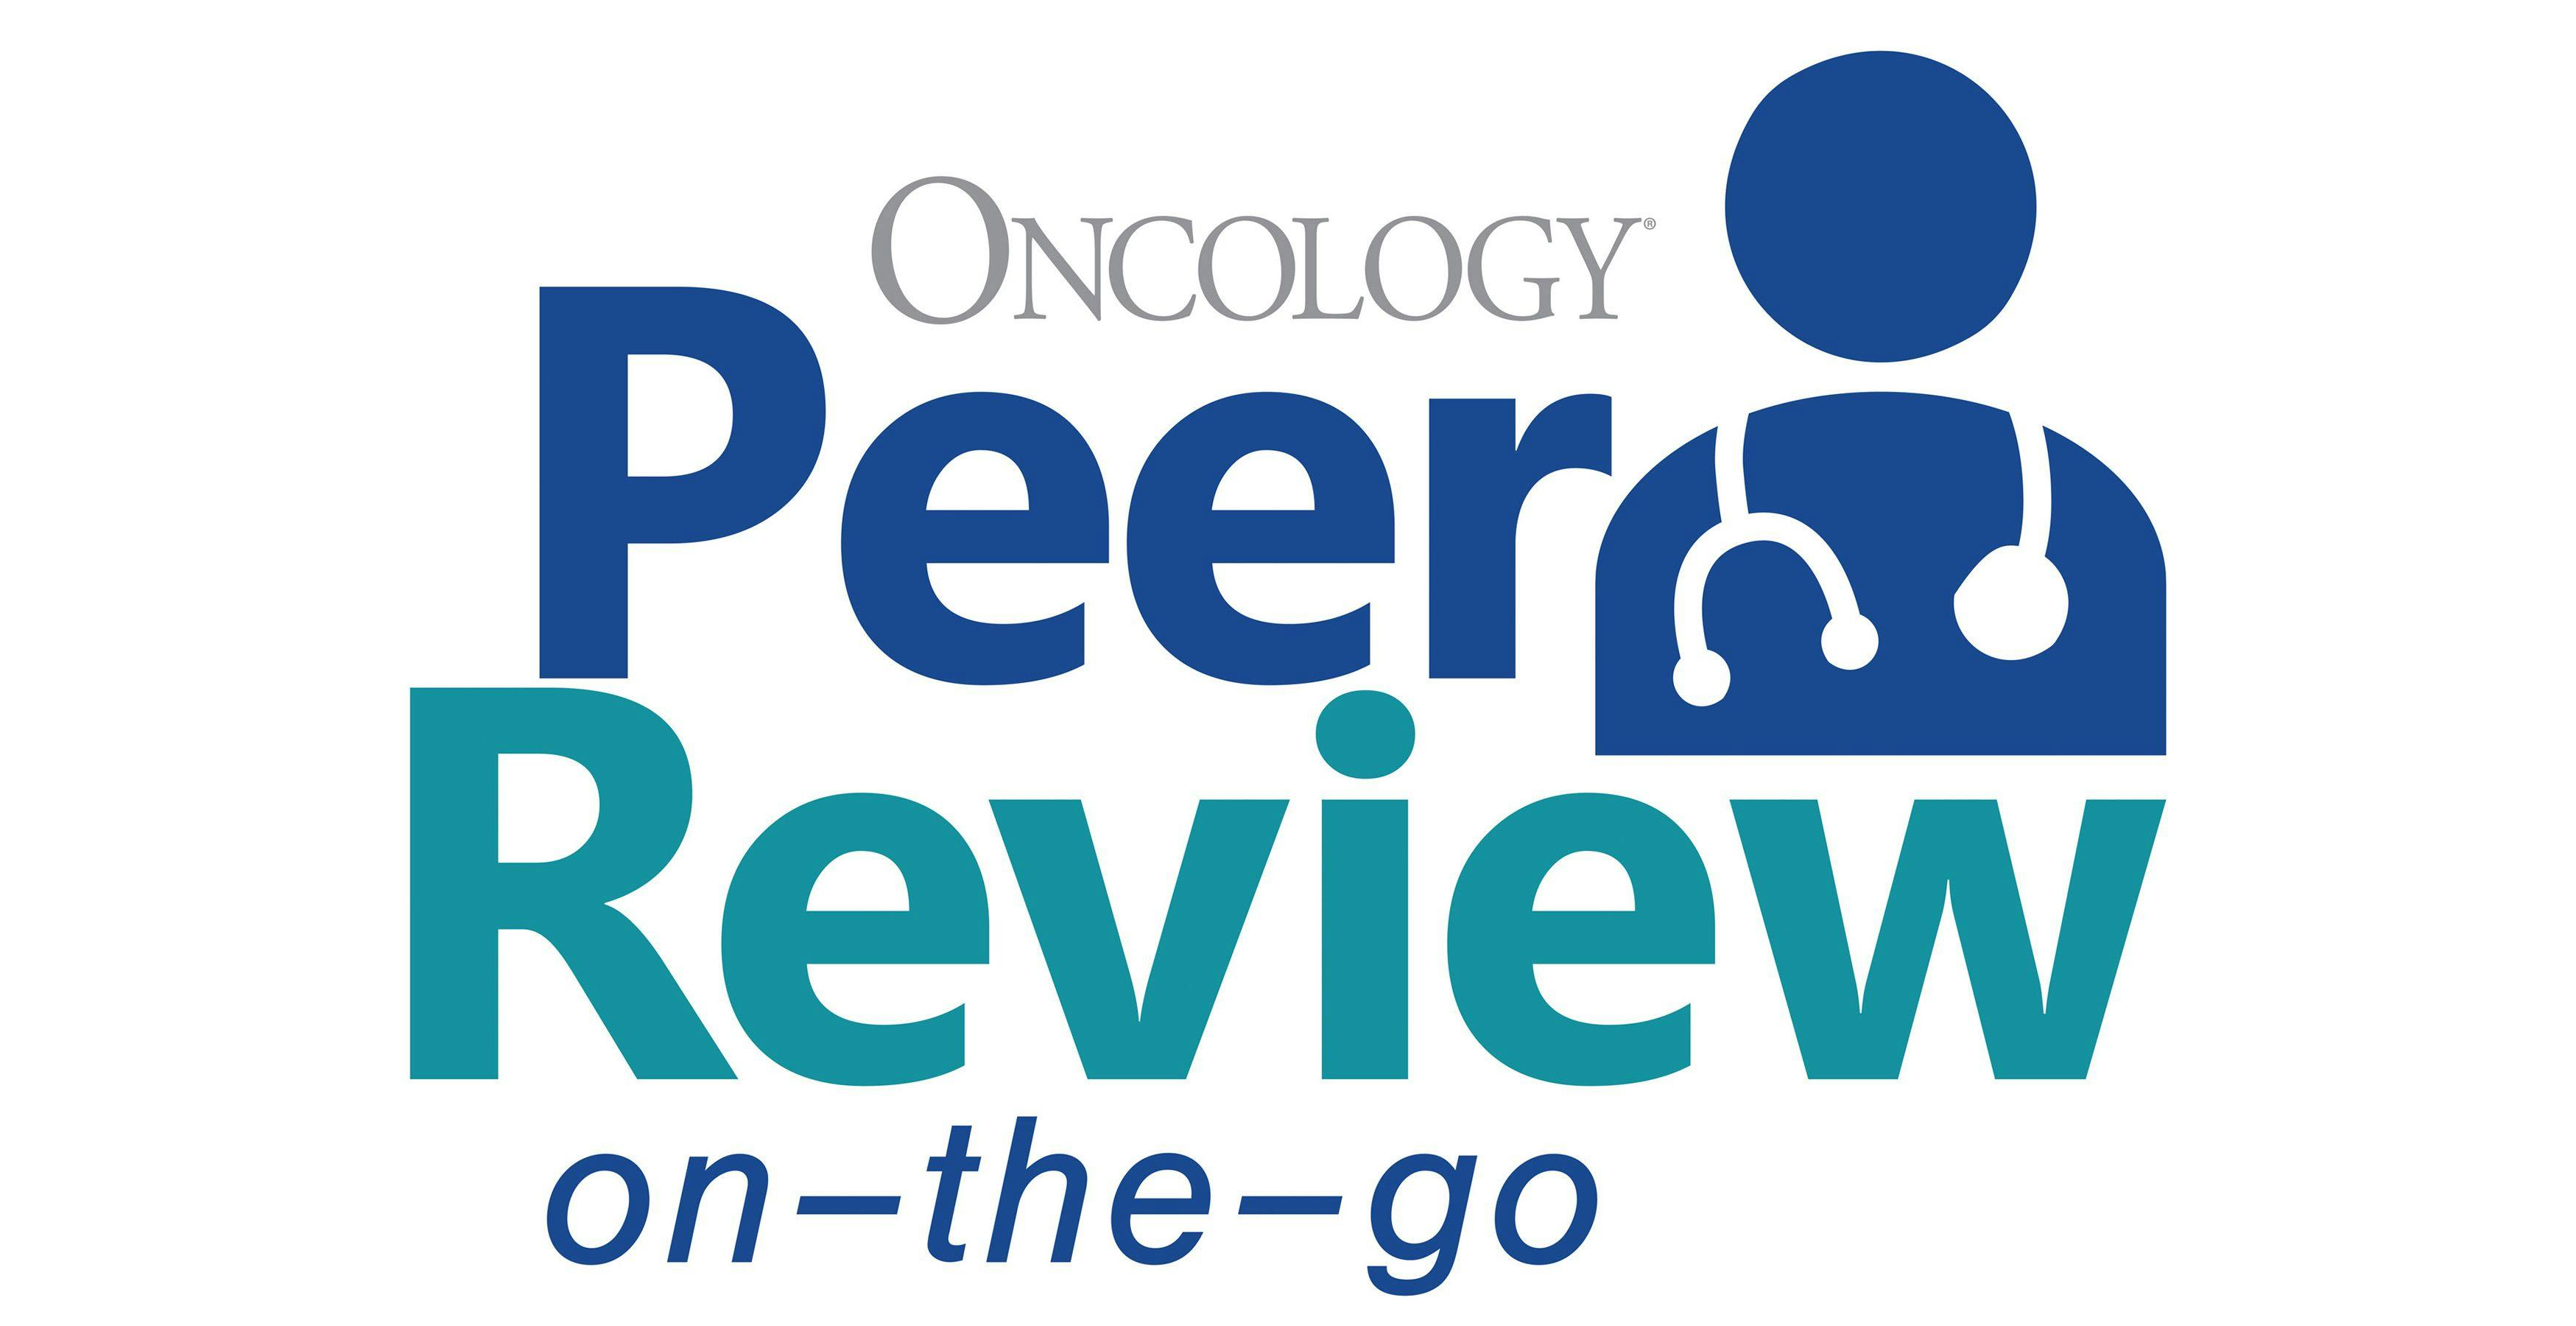 Jun Gong, MD, spoke with CancerNetwork® about the latest research from the journal ONCOLOGY® on elderly patients with muscle-invasive bladder cancer.